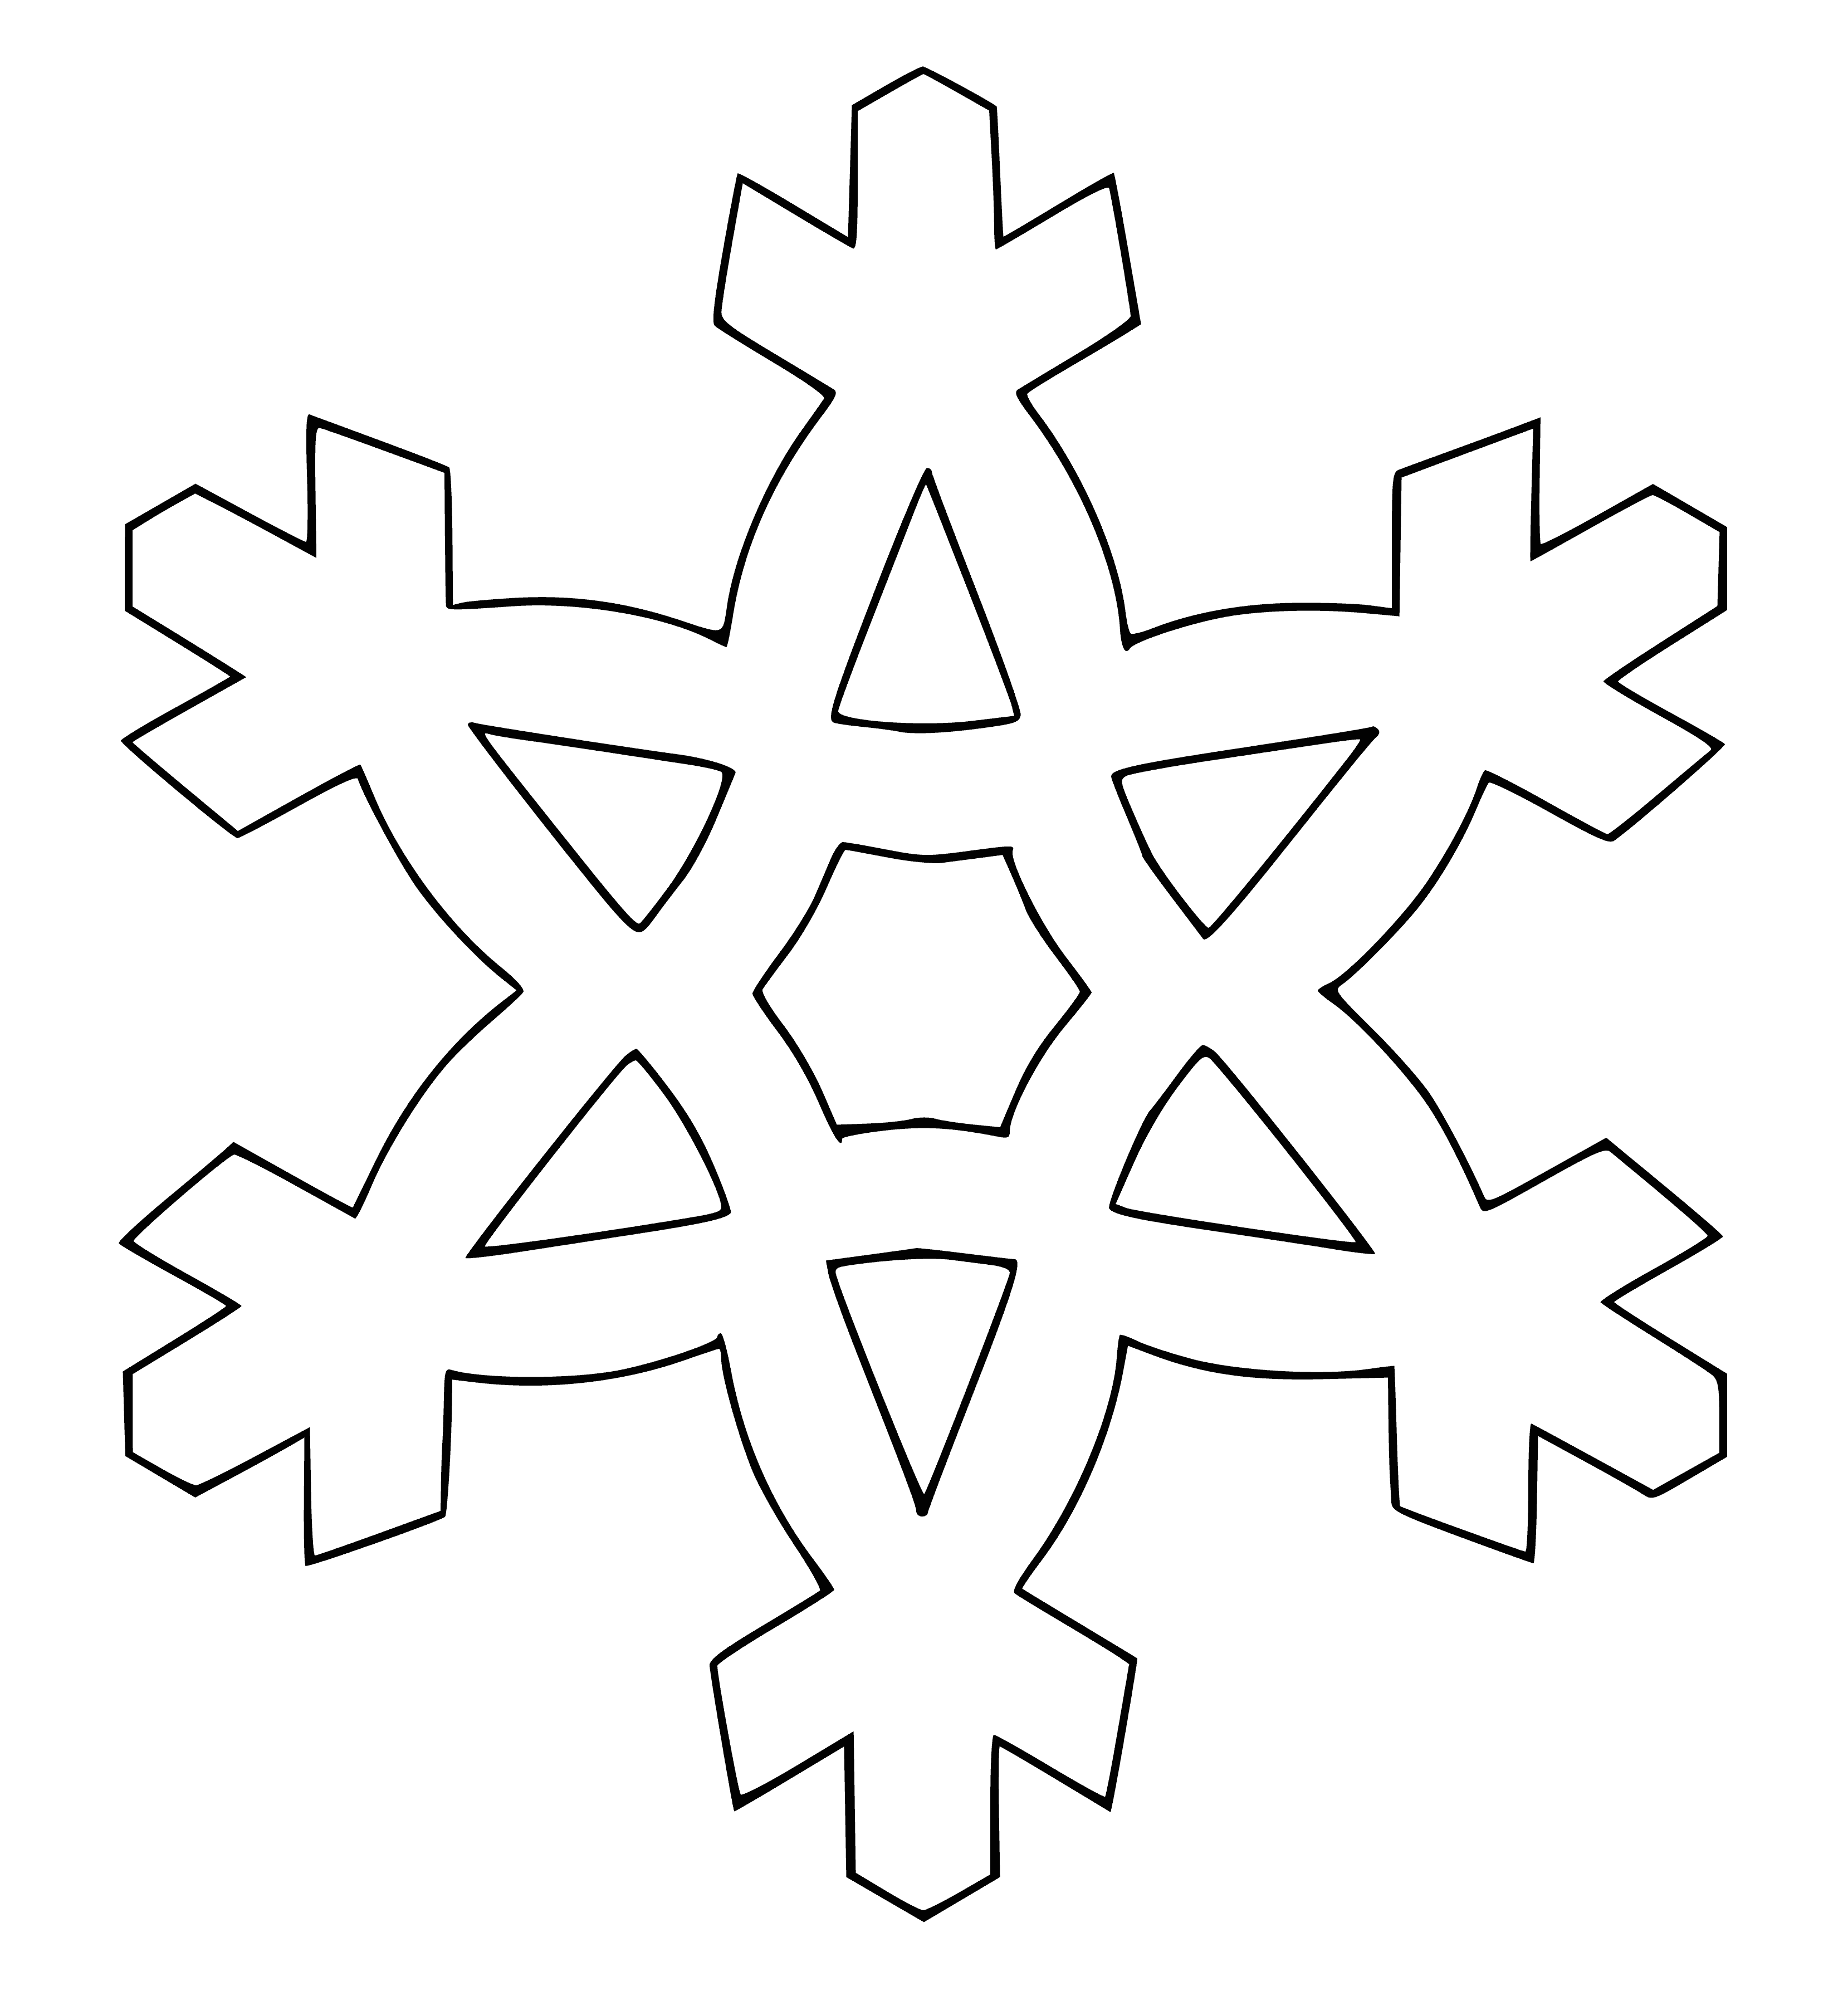 3 snowflakes in coloring page: white, 6 sides, falling from top.